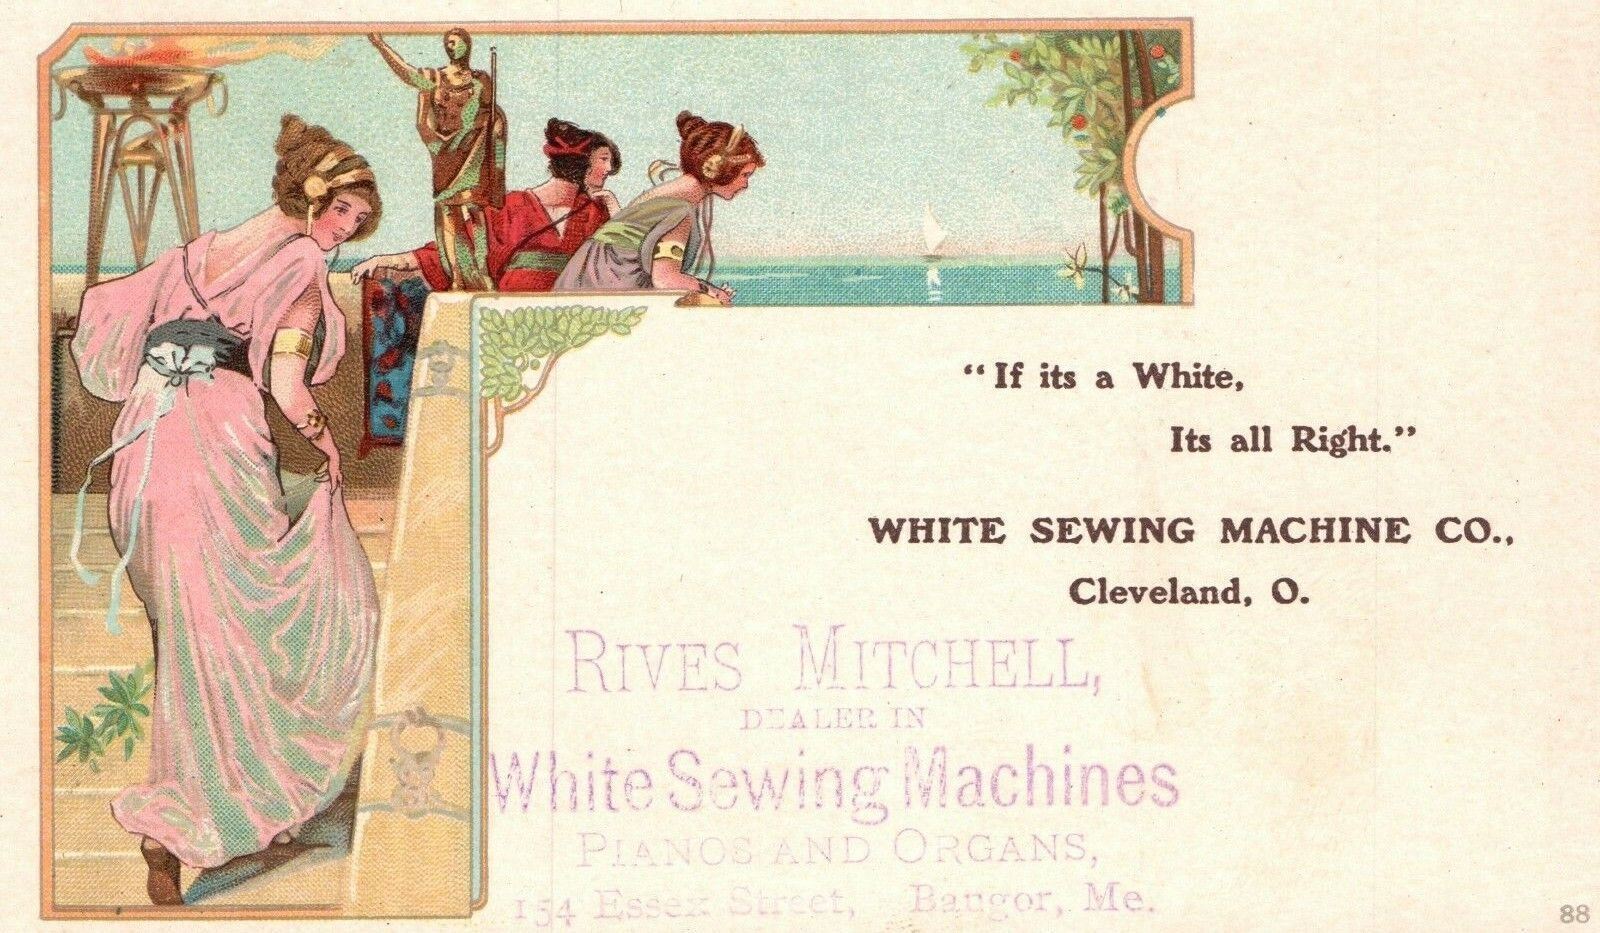 1880s-90s White Sewing Machine Co. Cleveland Ohio Rives Mitchell Pianos & Organs